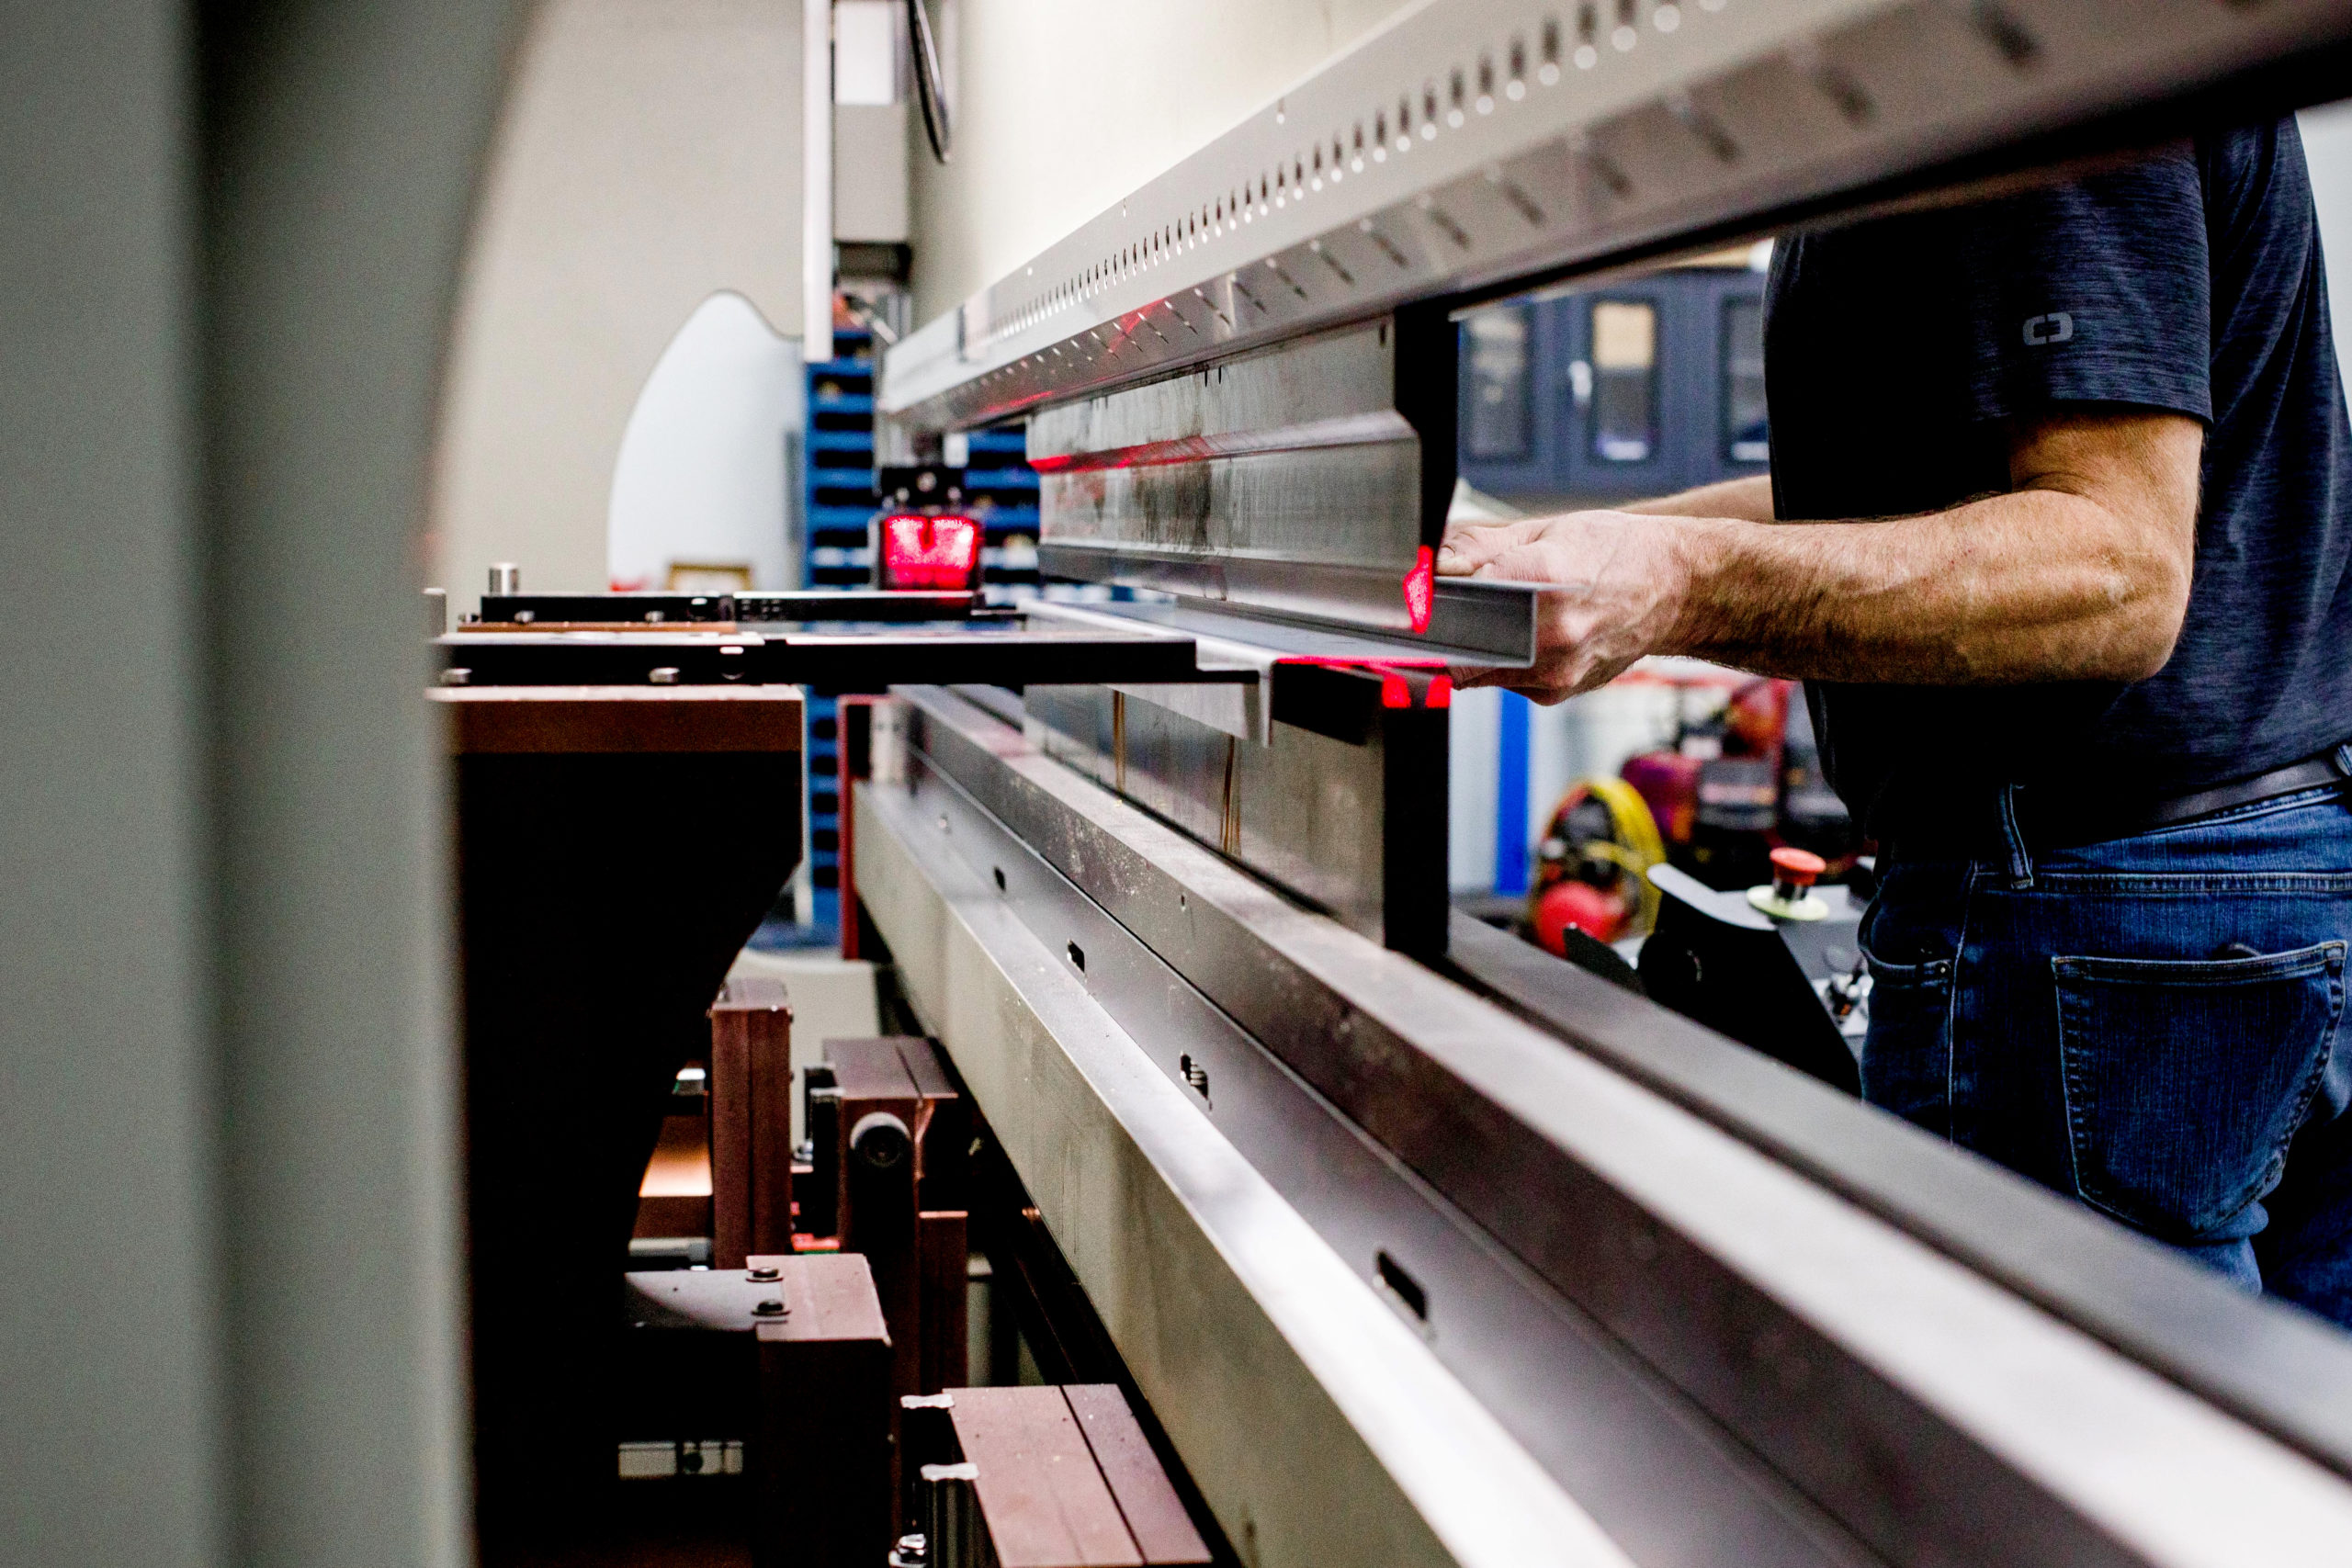 JKS Incorporated's director of fabrication, Michael Tennyson, uses the press brake to form a piece of steel.